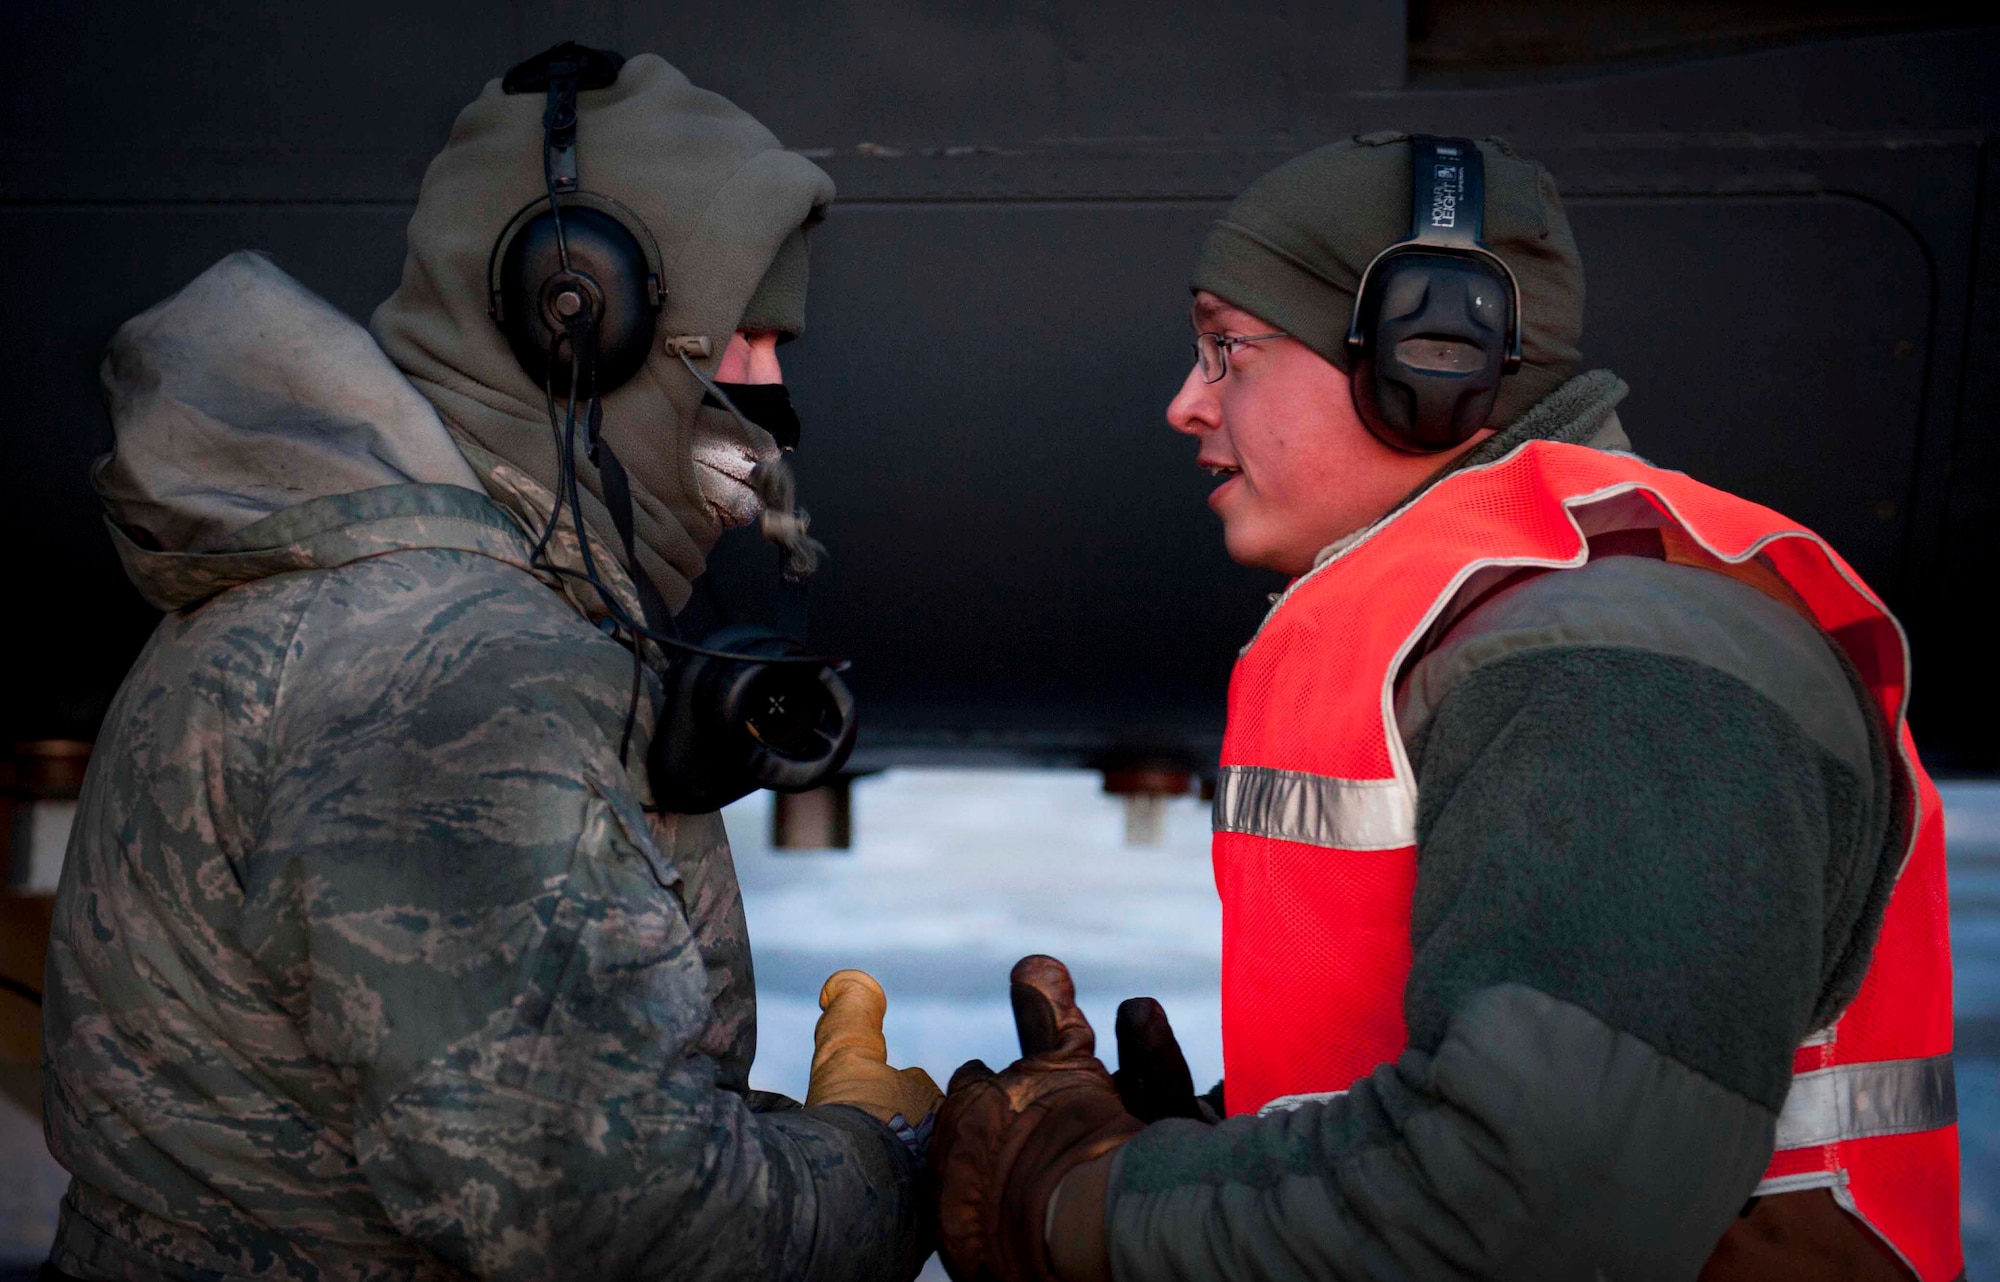 Senior Airman Taylor Lancaster speaks to a maintenance Airman Jan. 9, 2014, on Minot Air Force Base, N.D. Lancaster ensures his jet is fixed and prepared to take off before its flight time. Lancaster is a 5th Aircraft Maintenance Squadron aircraft crew chief. (U.S. Air Force photo/Airman 1st Class Sahara L. Fales)